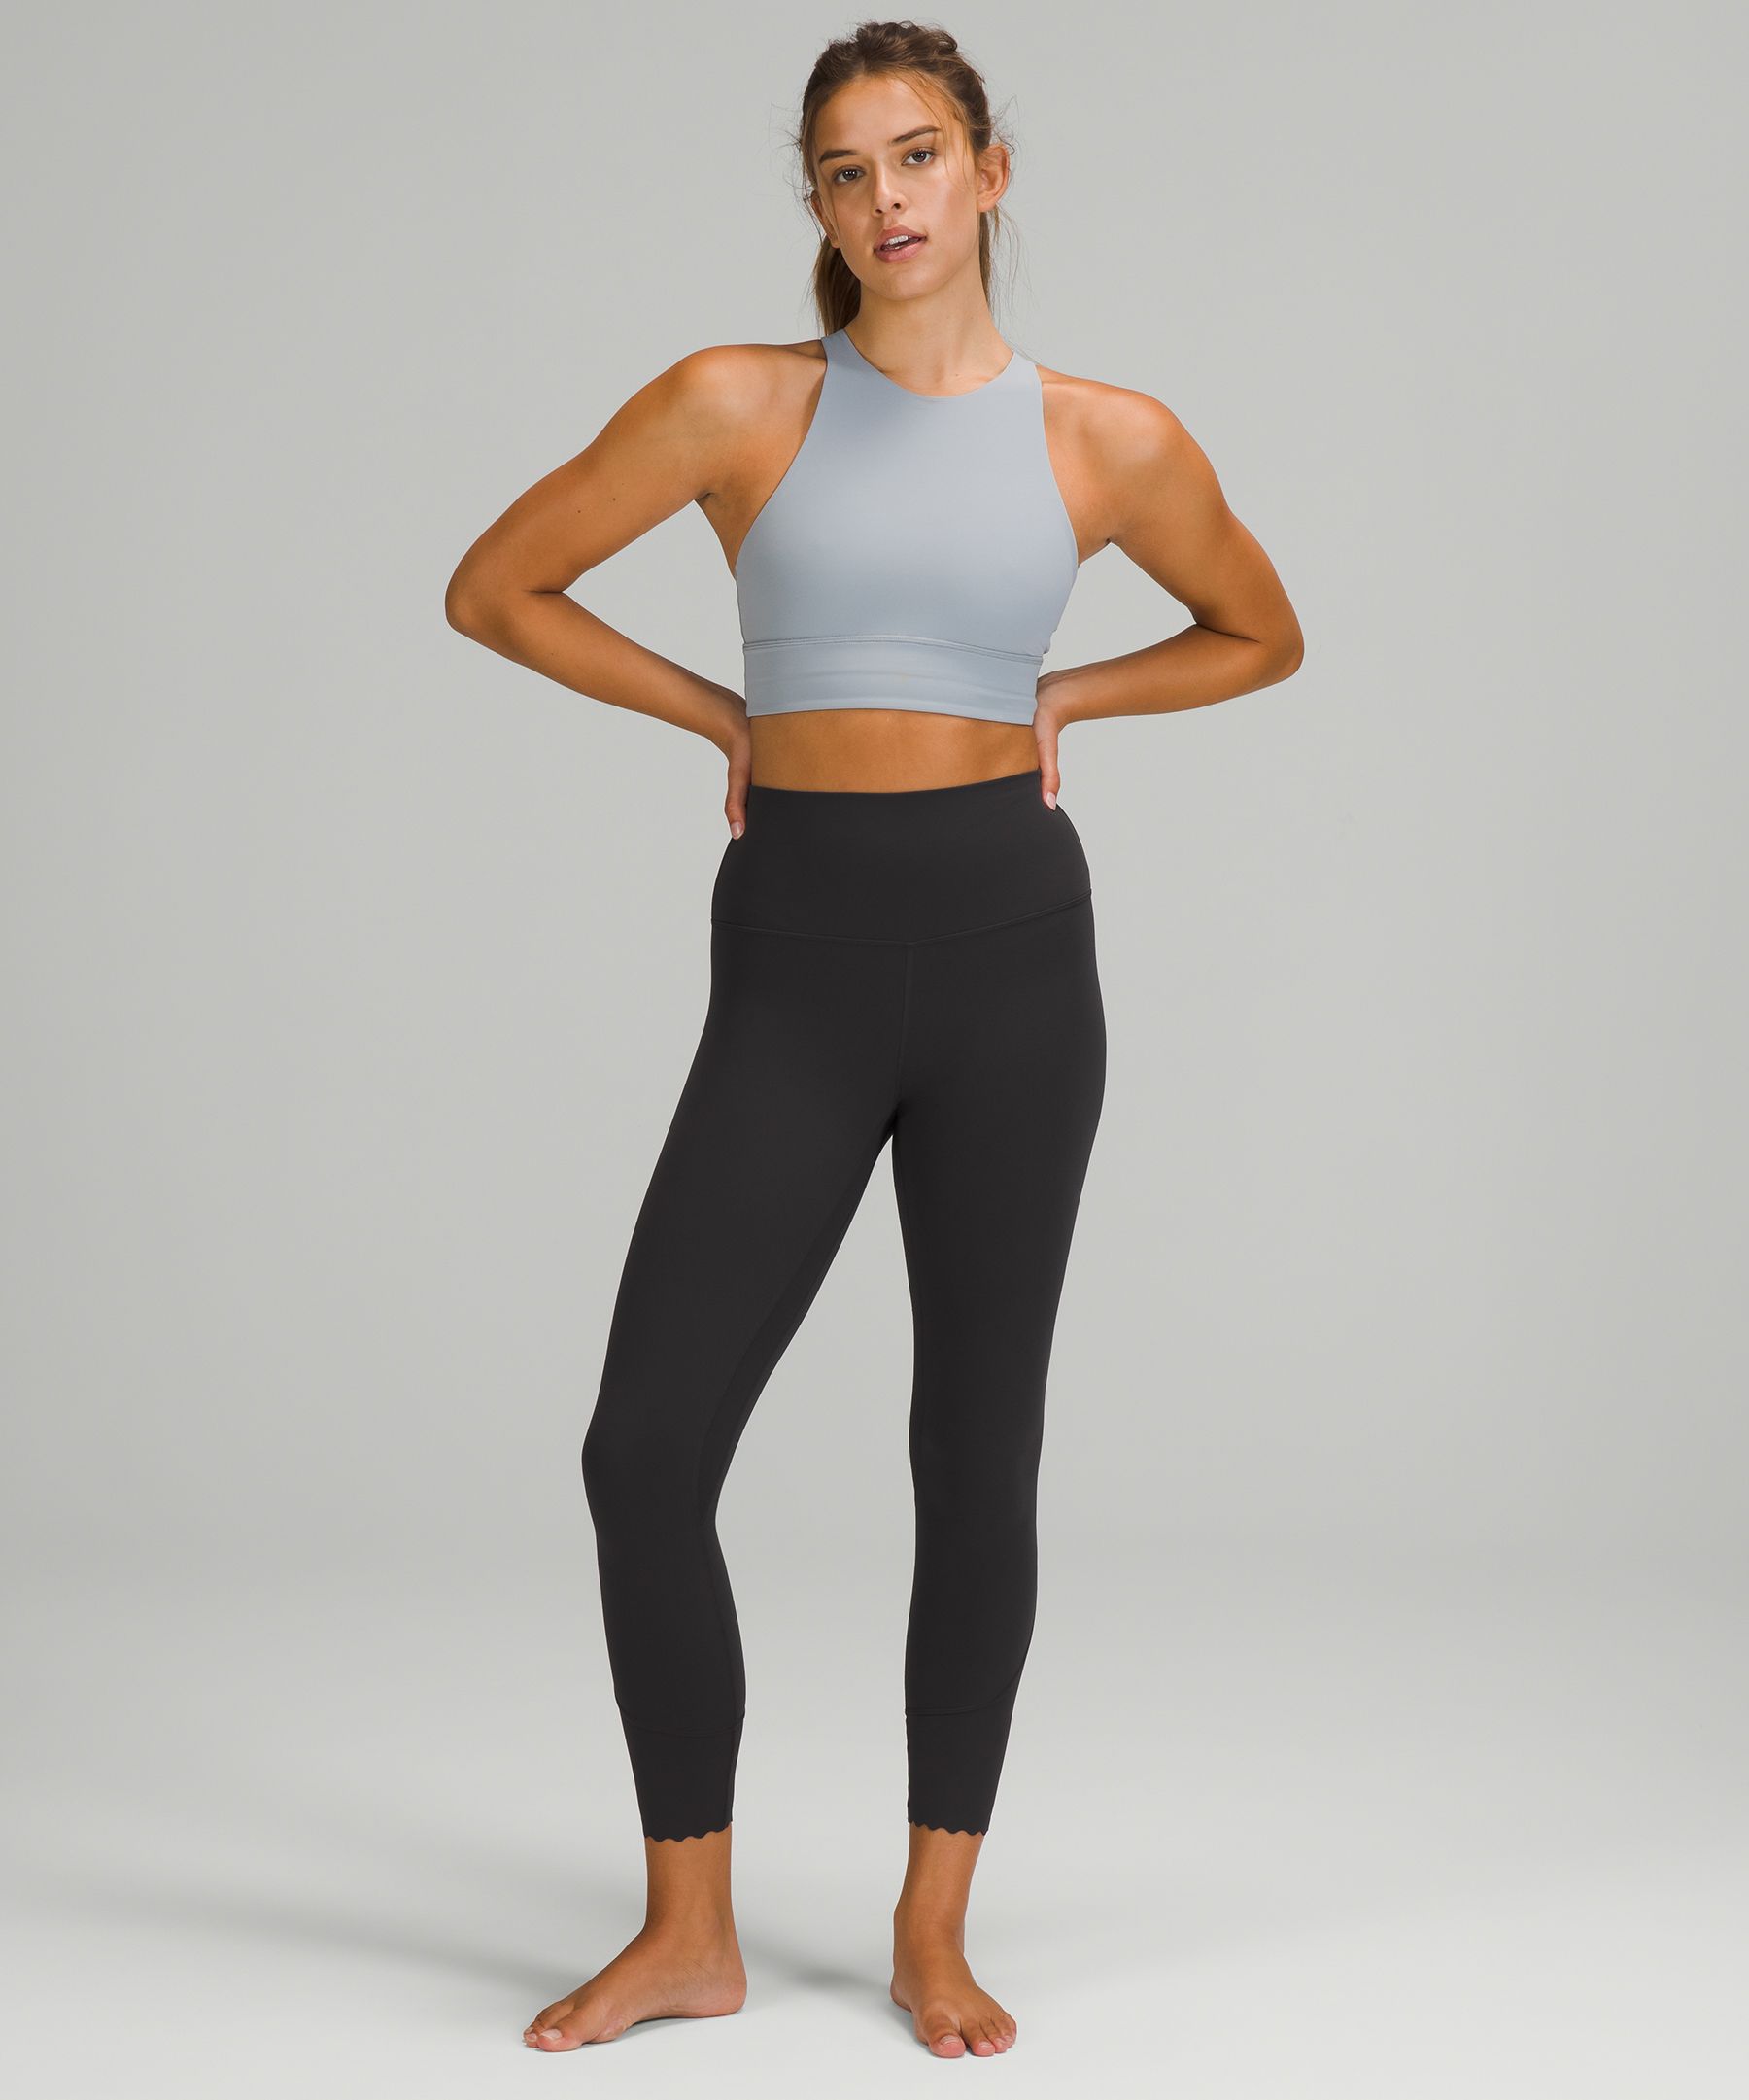 All Things Scallop: The Hunt for Scallop Hem Activewear